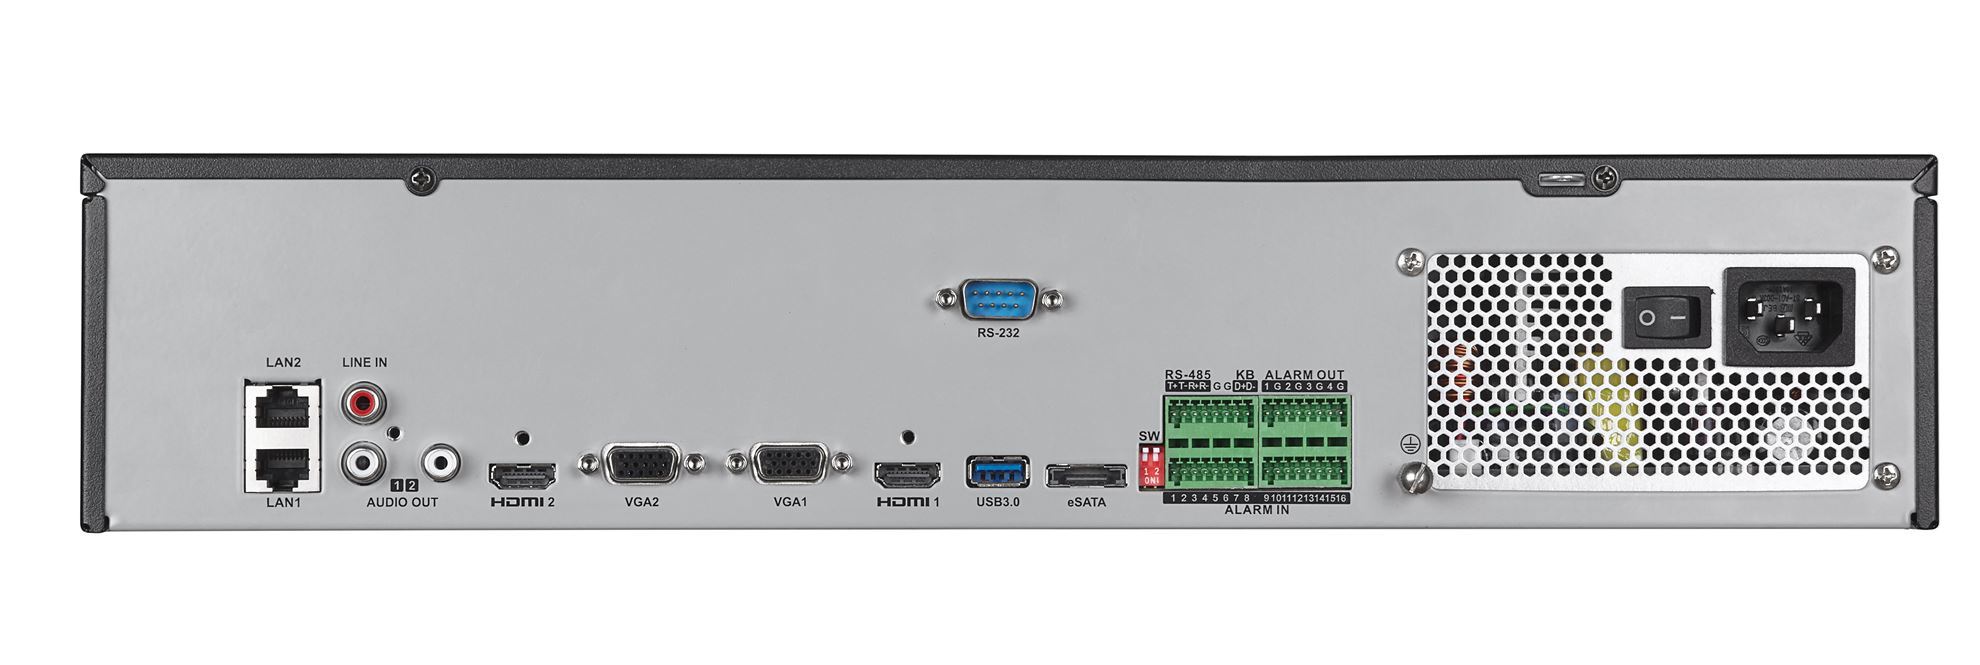 HIKVISION 64 Channel 4K NVR - NO HDD. 2-3 Working Days Lead Time.